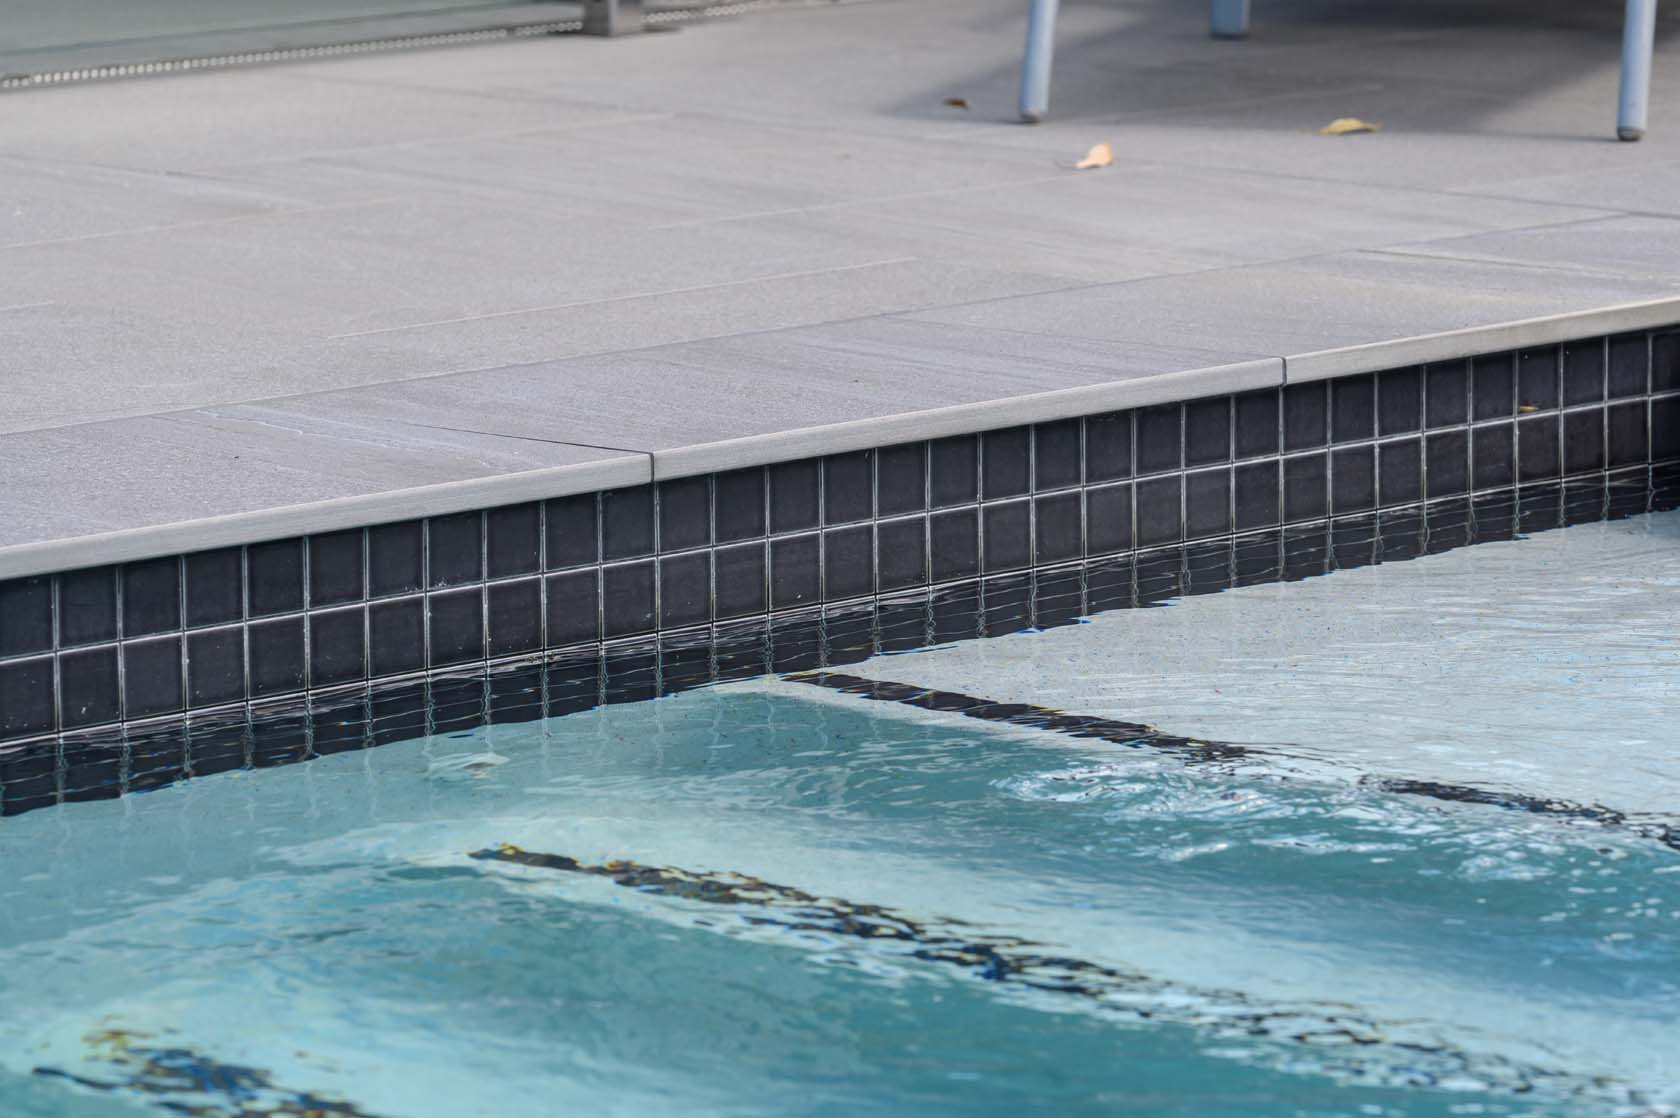 Jupiter Porcelain pool coping and surrounds with CMC305 Dark Grey ceramic waterline tiles